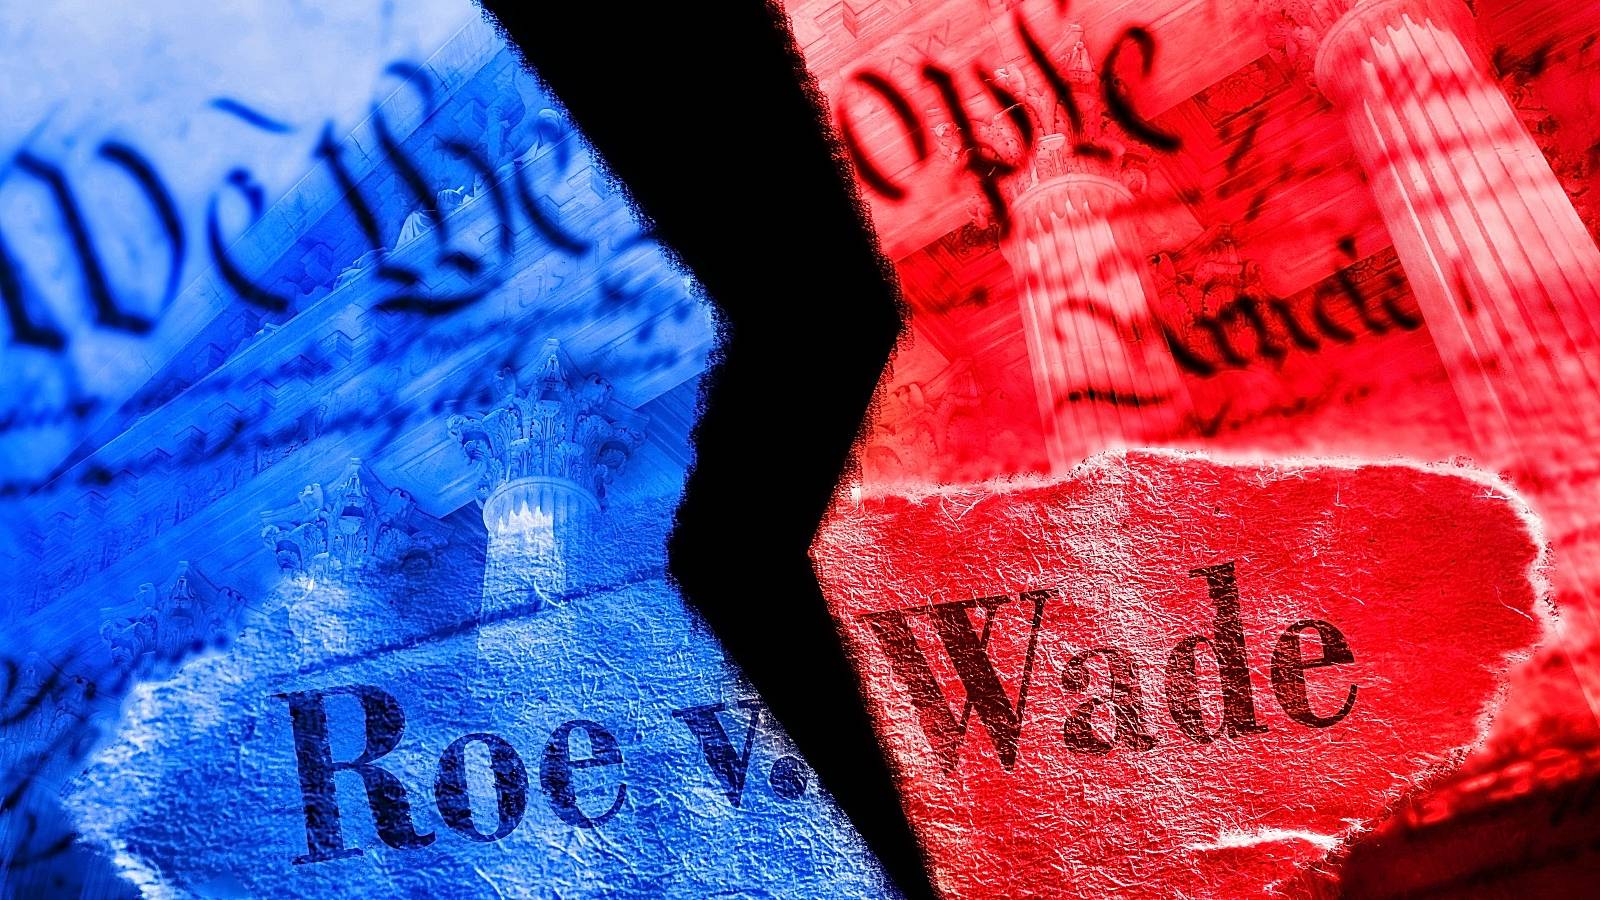 Torn red and blue Roe V Wade newspaper headline on the United States Constitution and Supreme Court - stock photo
Torn Roe V Wade newspaper headline in red and blue on the US Constitution with the United States Supreme Court in background
